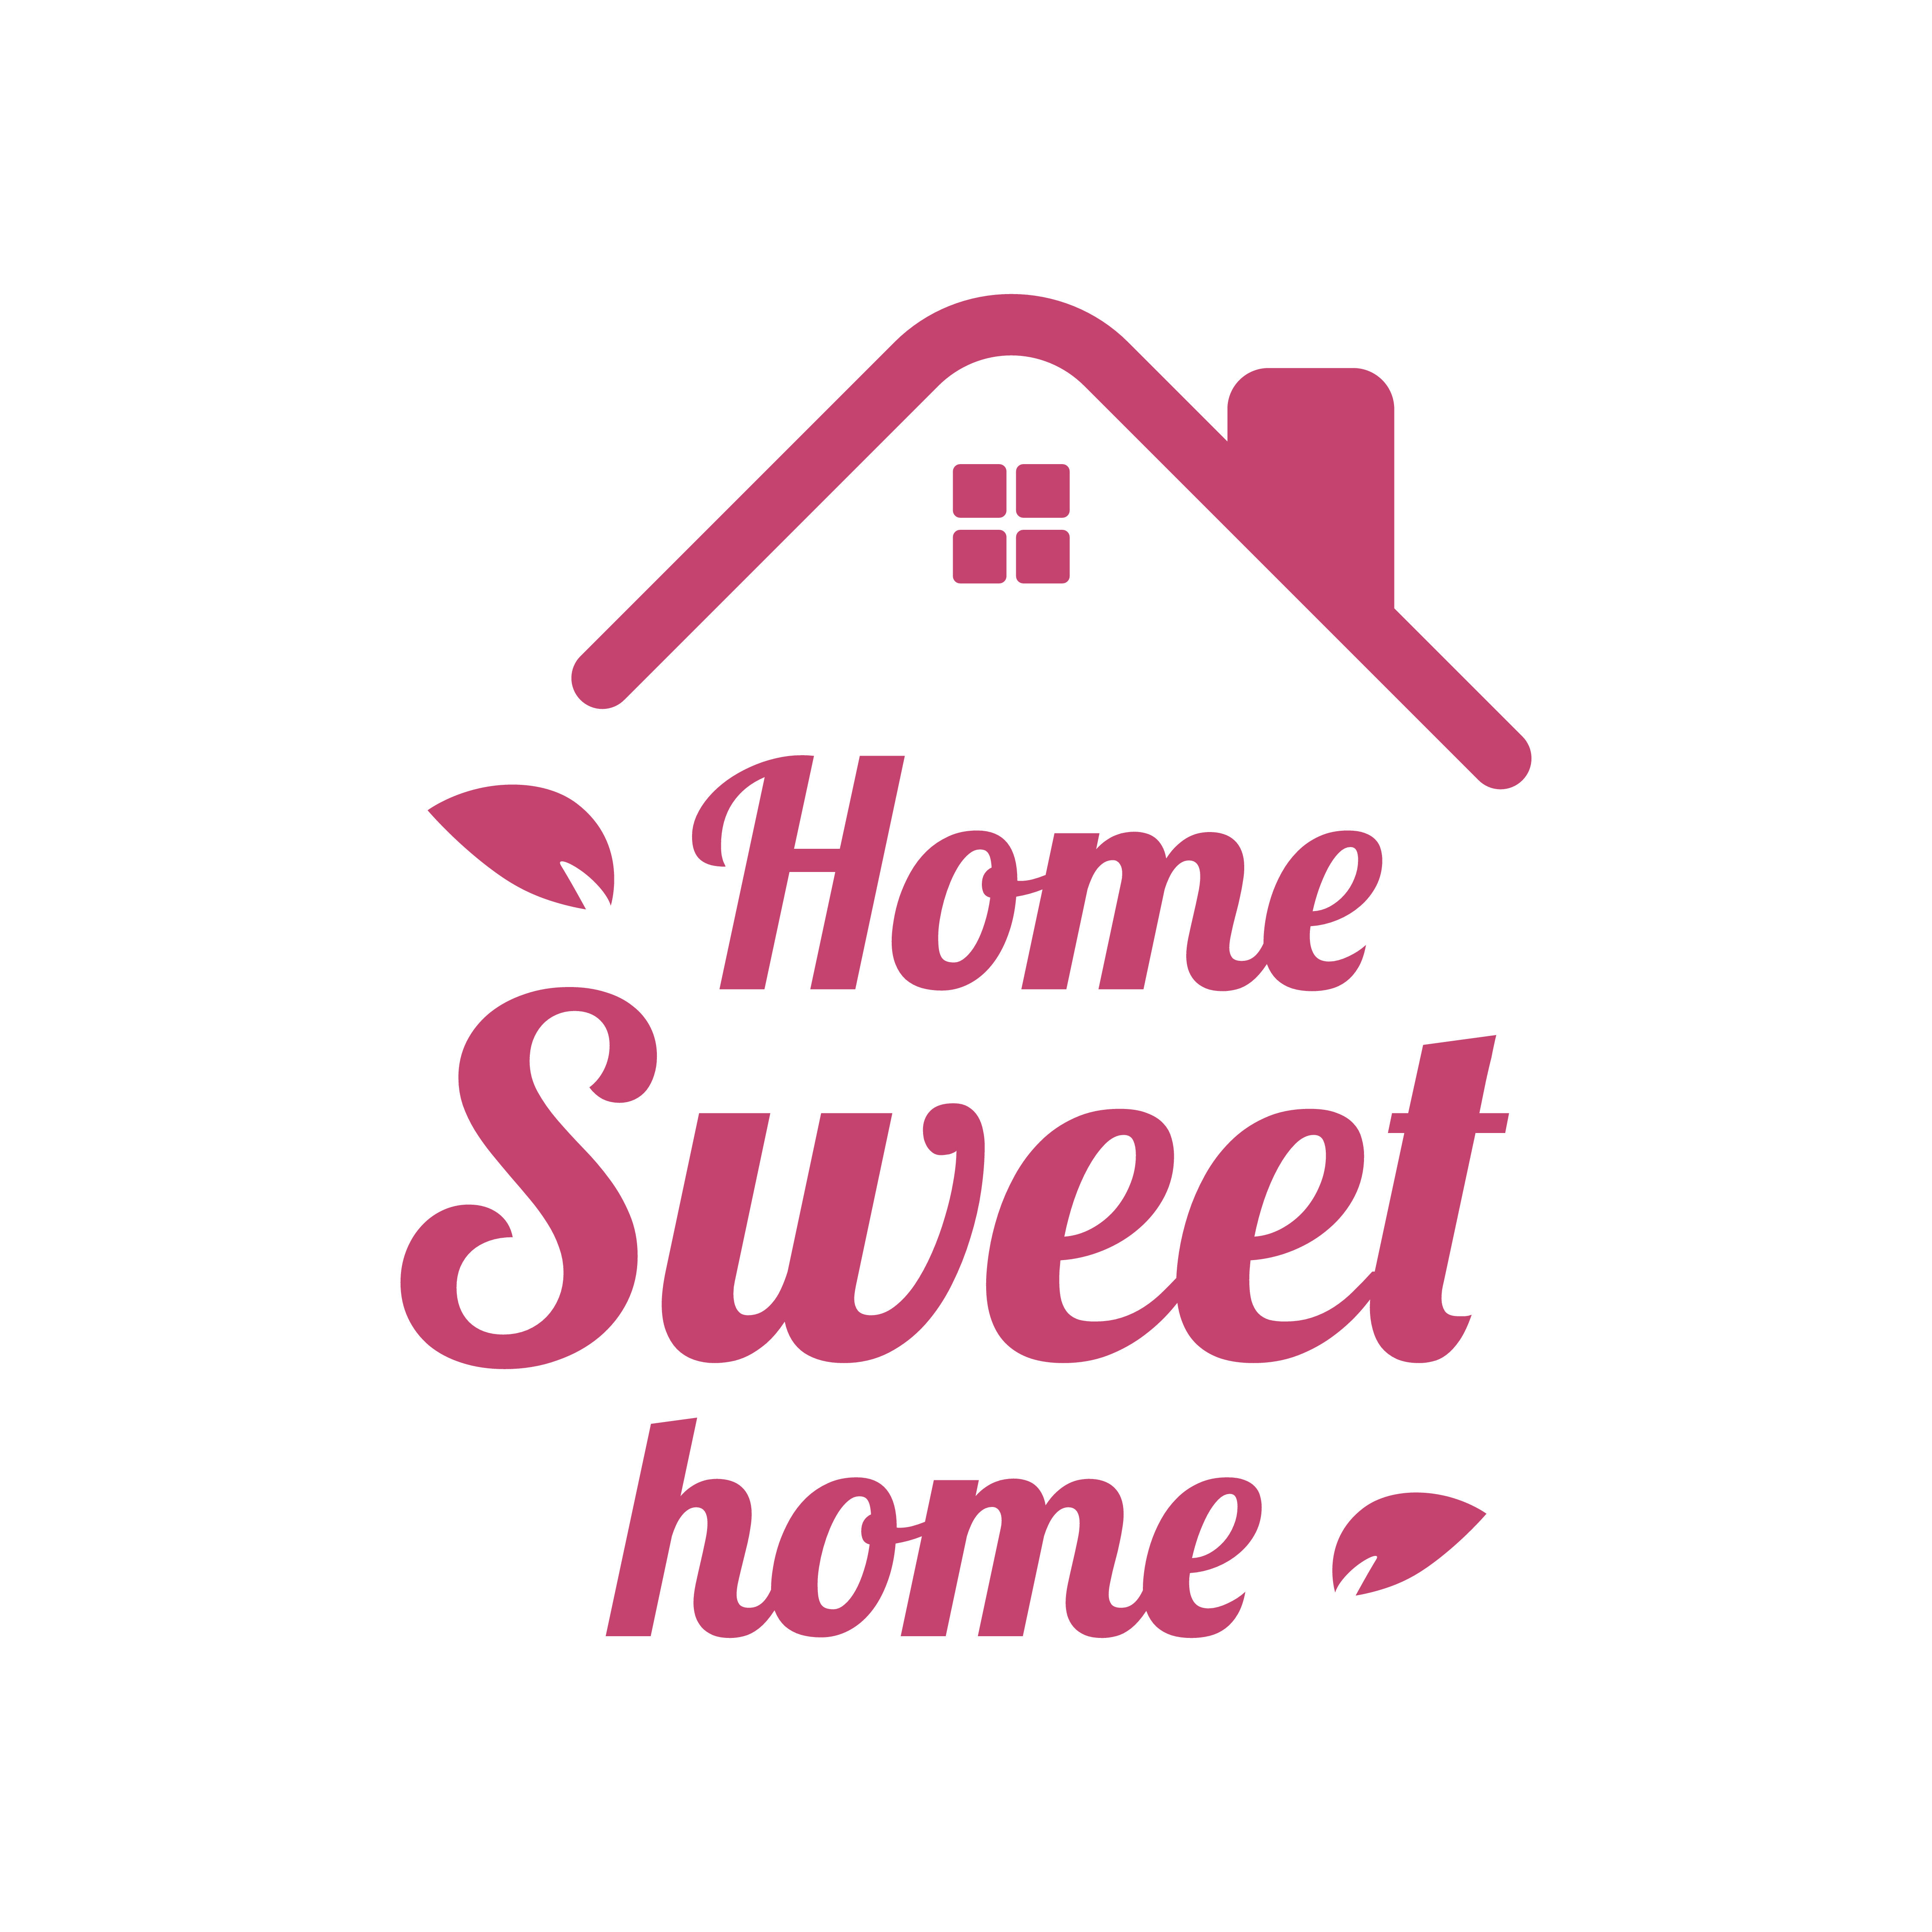 Download Home sweet home text quotes SVG, EPS, PNG By Imaginicon ...